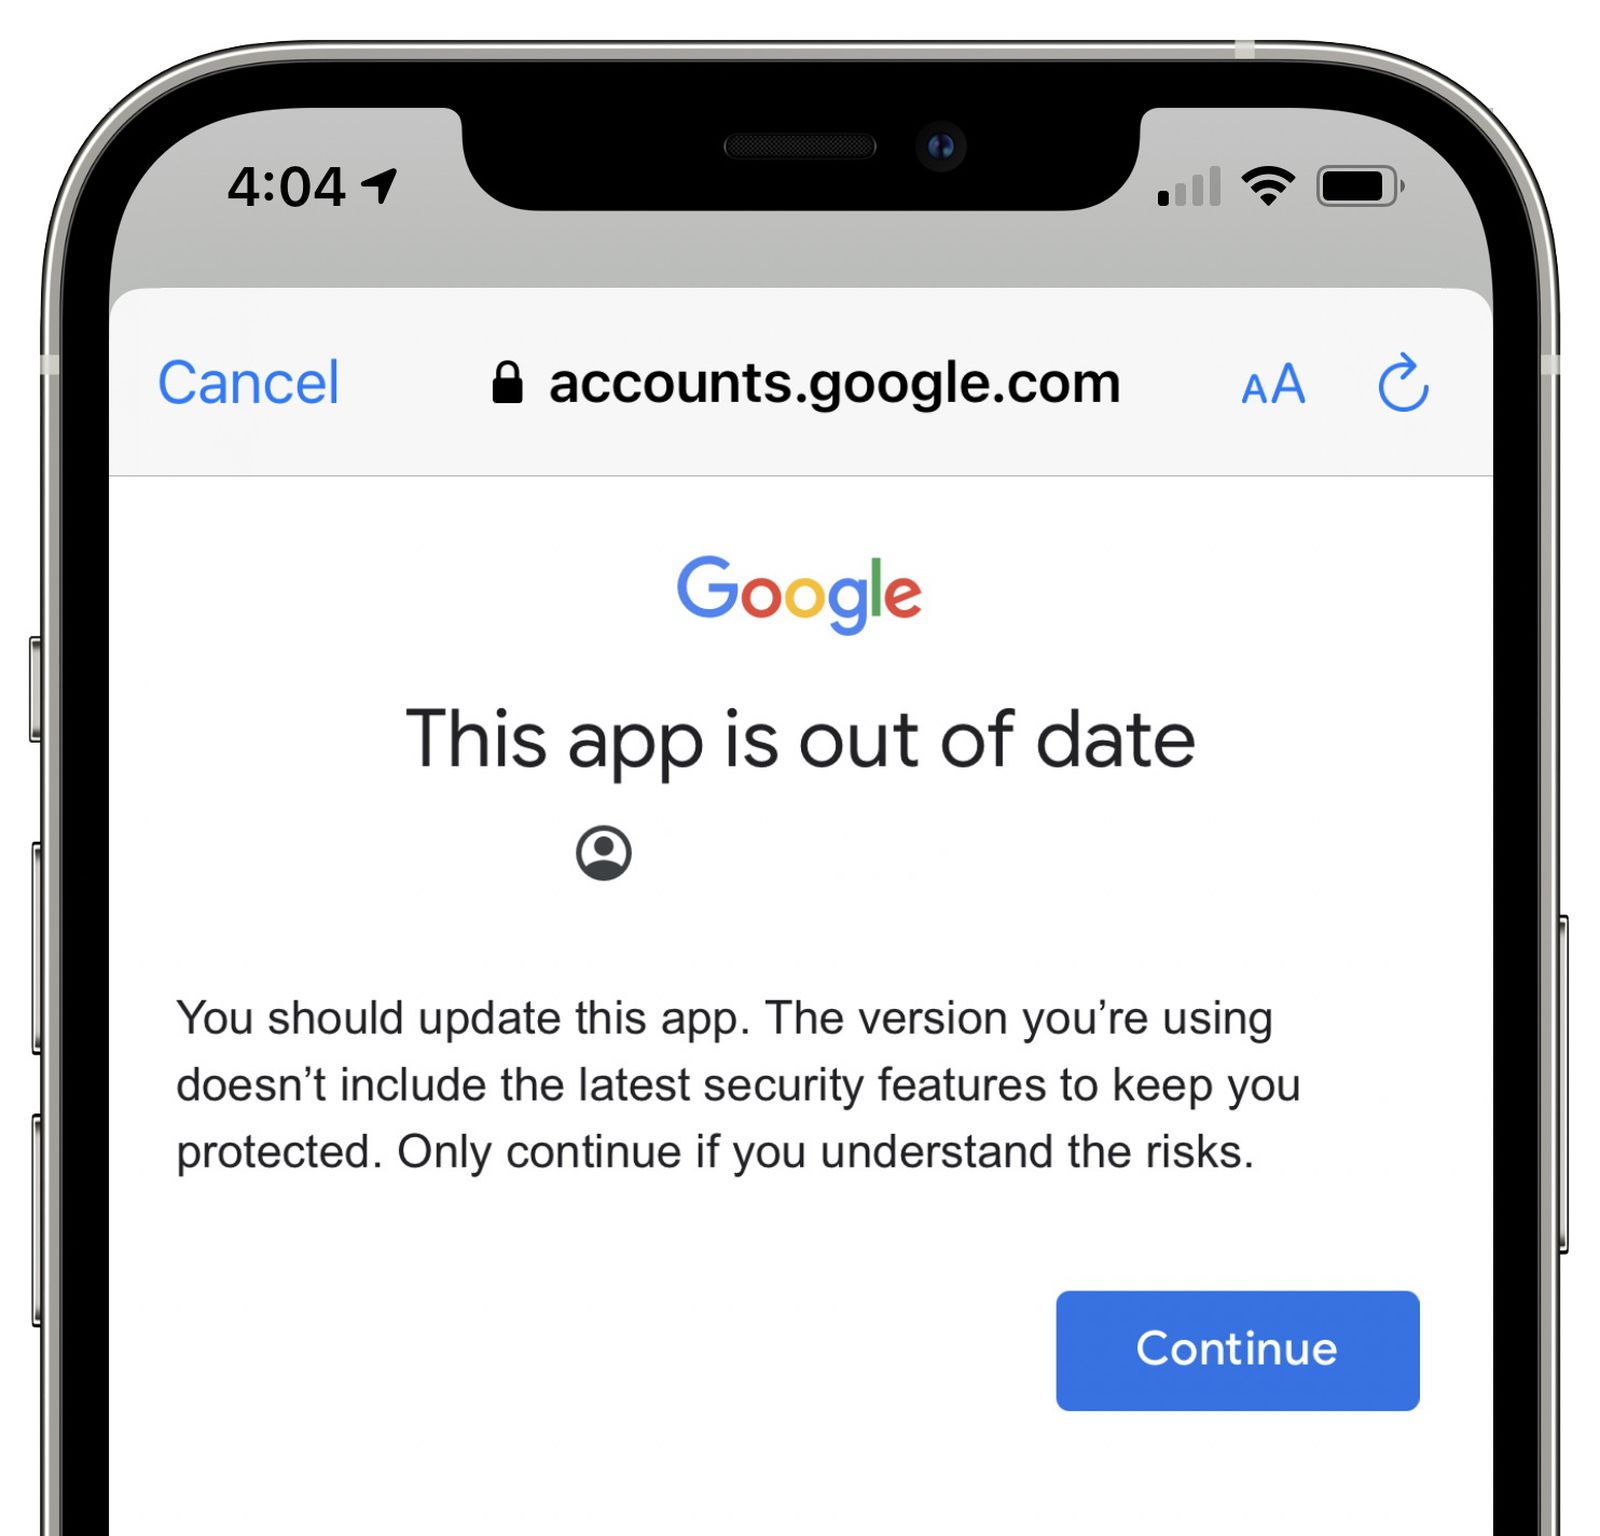 Gmail iOS app outdated after two months without updates, as Google delays privacy labels [Updated]